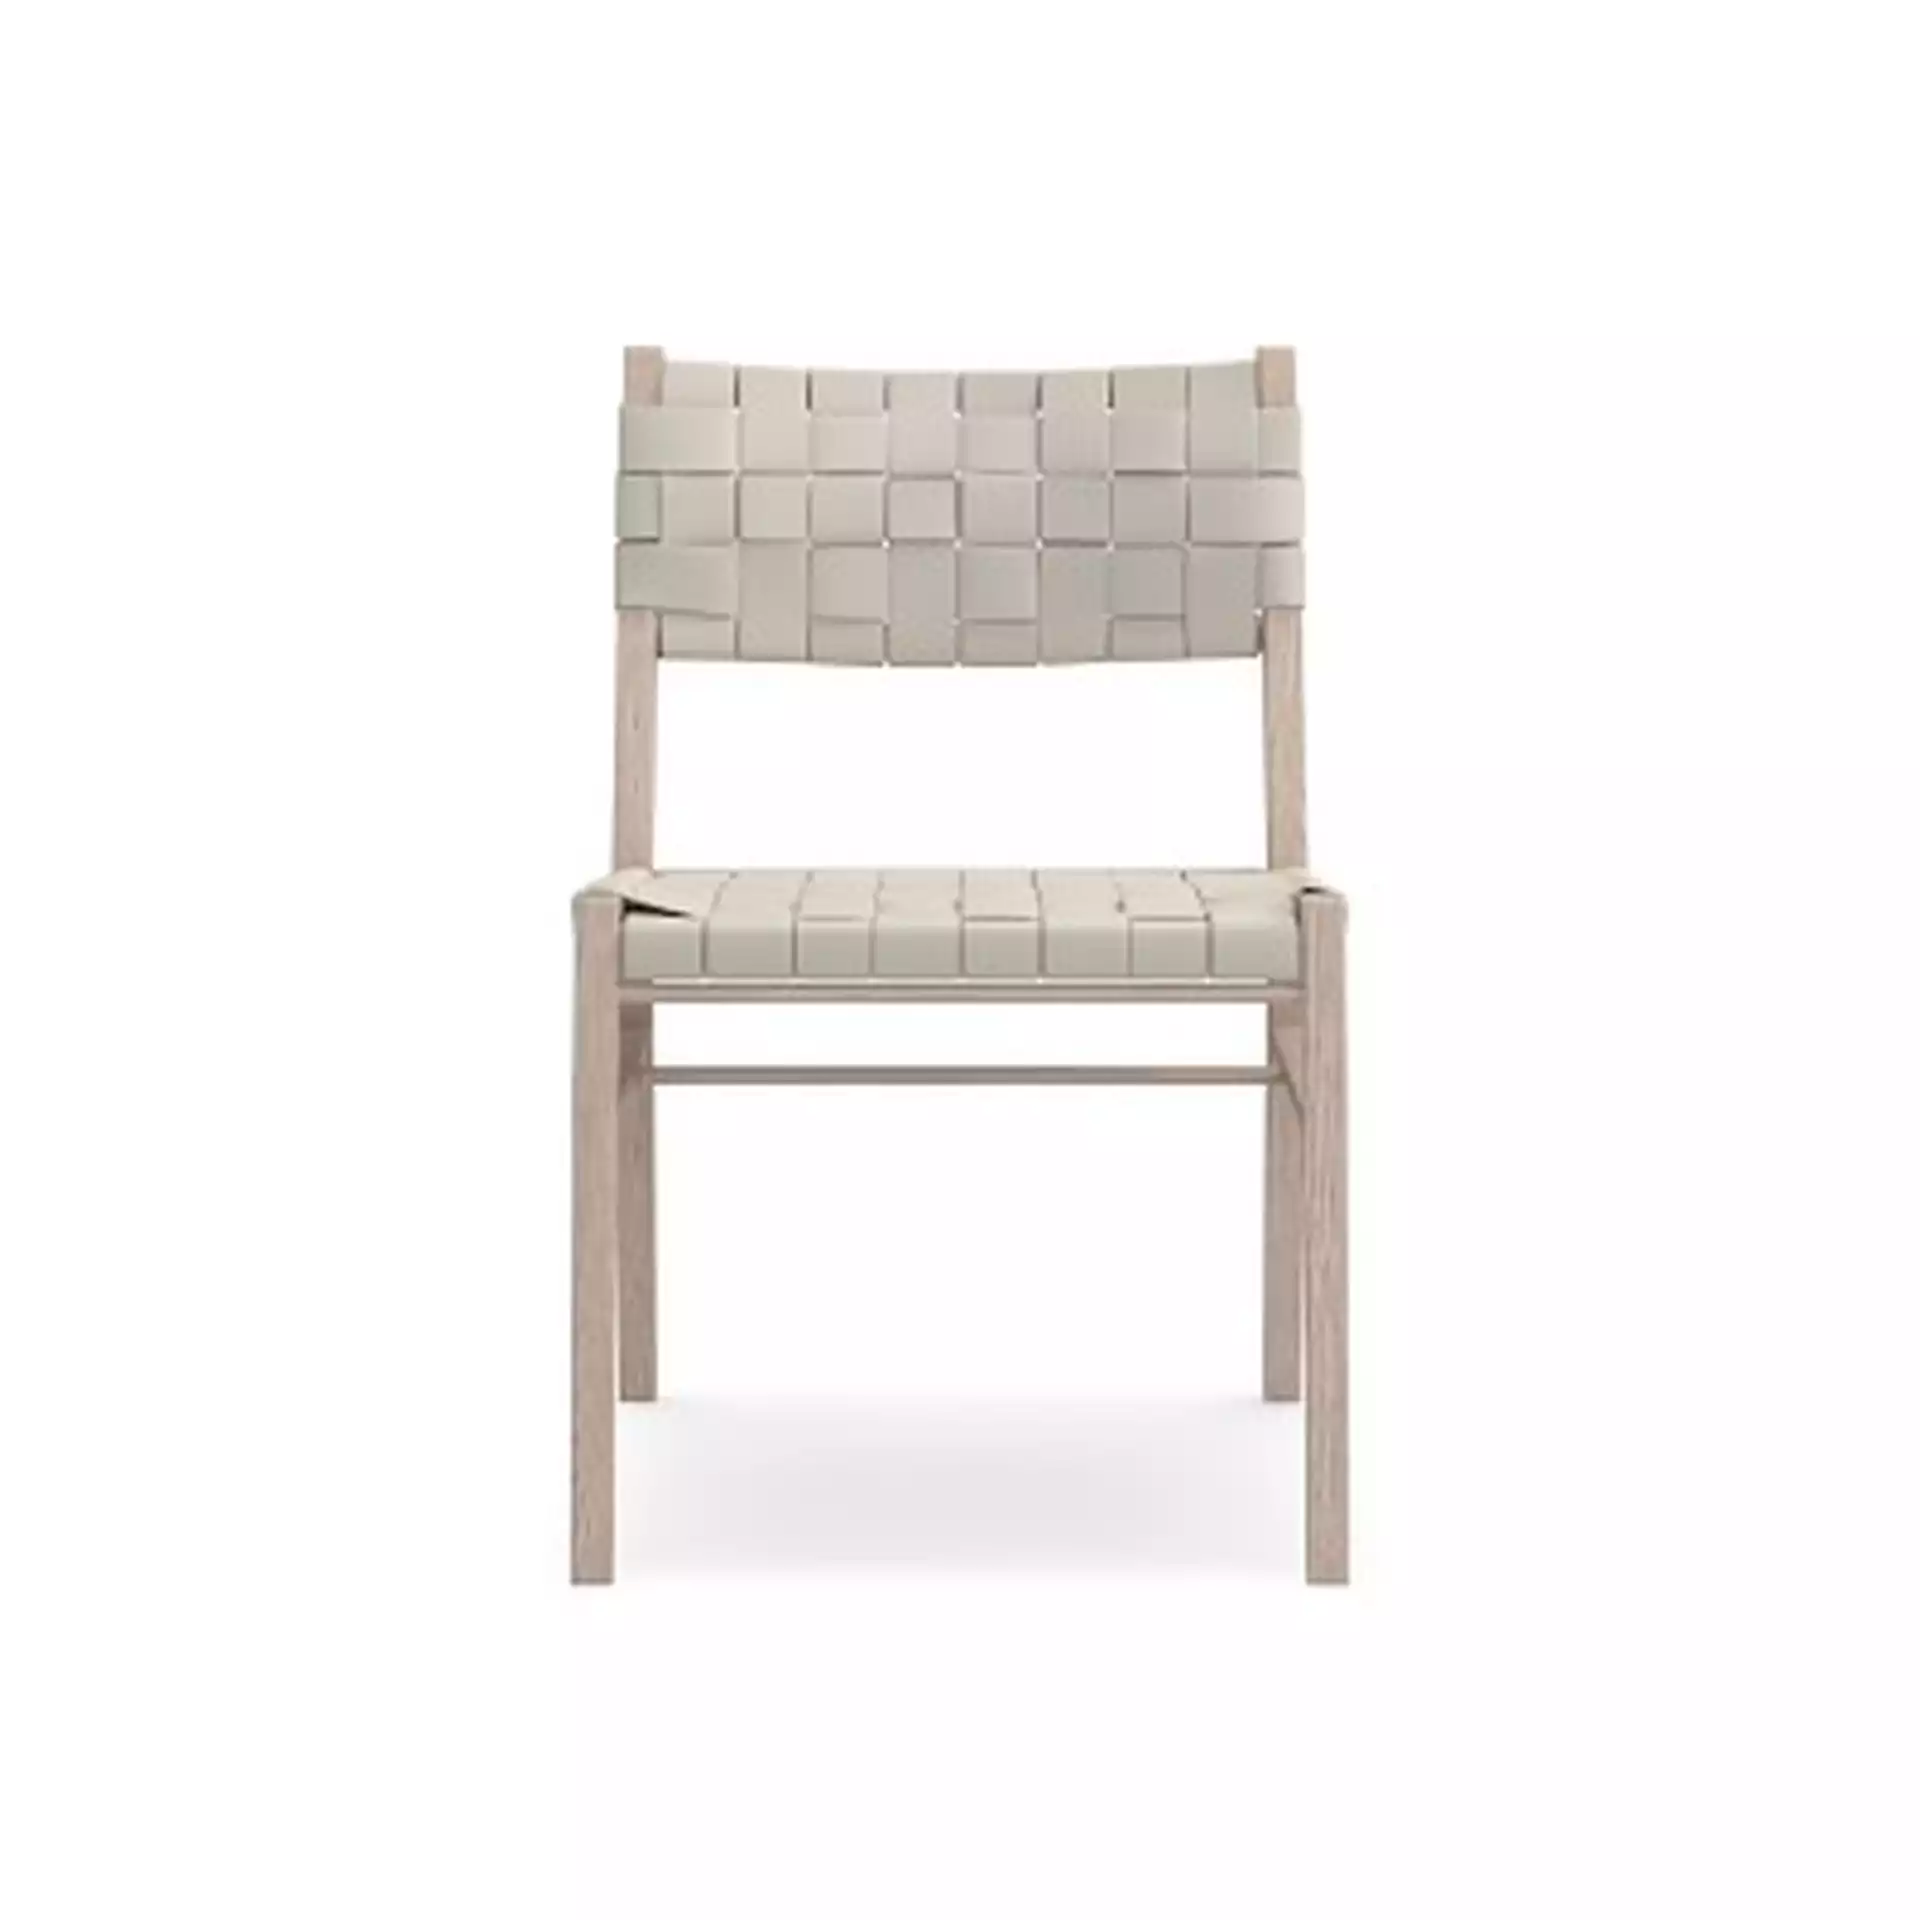 Stratton Dining Side Chair, Whitewash Leather, Ivory